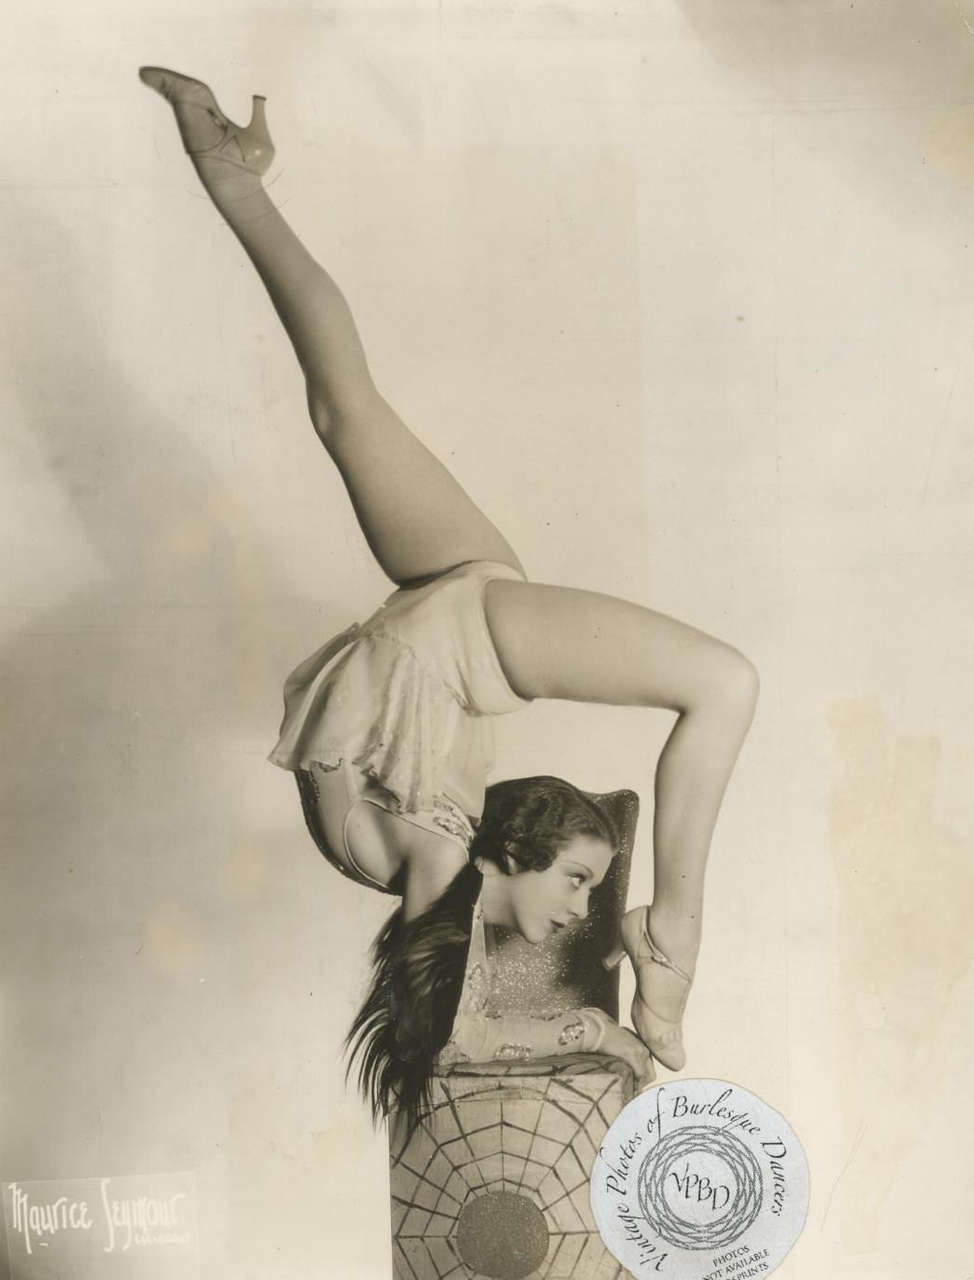 Barbara Blaine La Bellissima Contorsionista Photographed By Maurice Seymour Chicago 1934 NSF